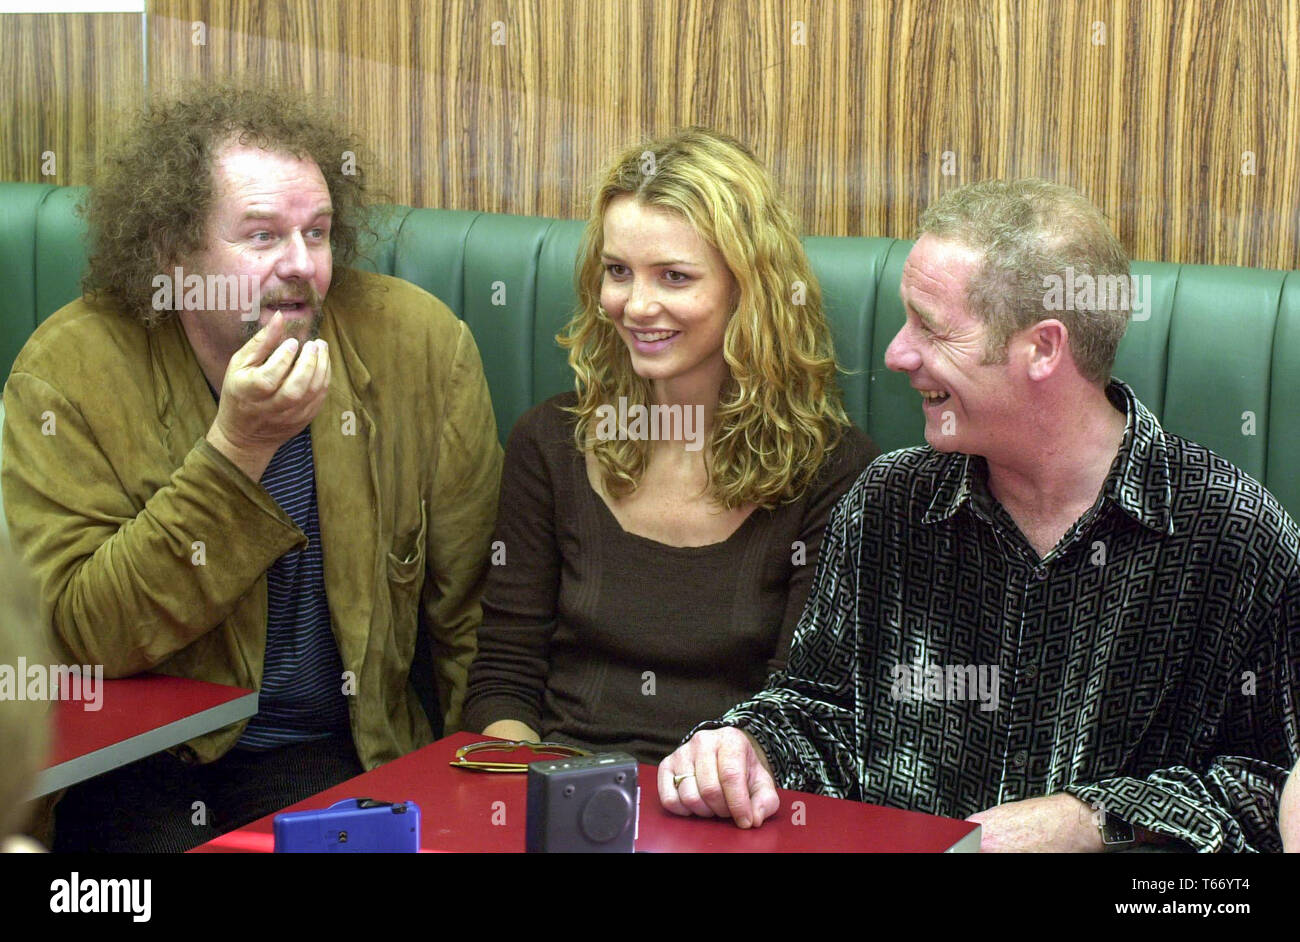 The launch of Antonine Short Film Factory's 8 1/2 Scottish Film Scheme at Favorit in Edinburgh today Wednesday 17/8/00. Stars of the film Miss Julie, Peter Mullan and Saffron Burrows are pictured with director Mike Figgis. Stock Photo